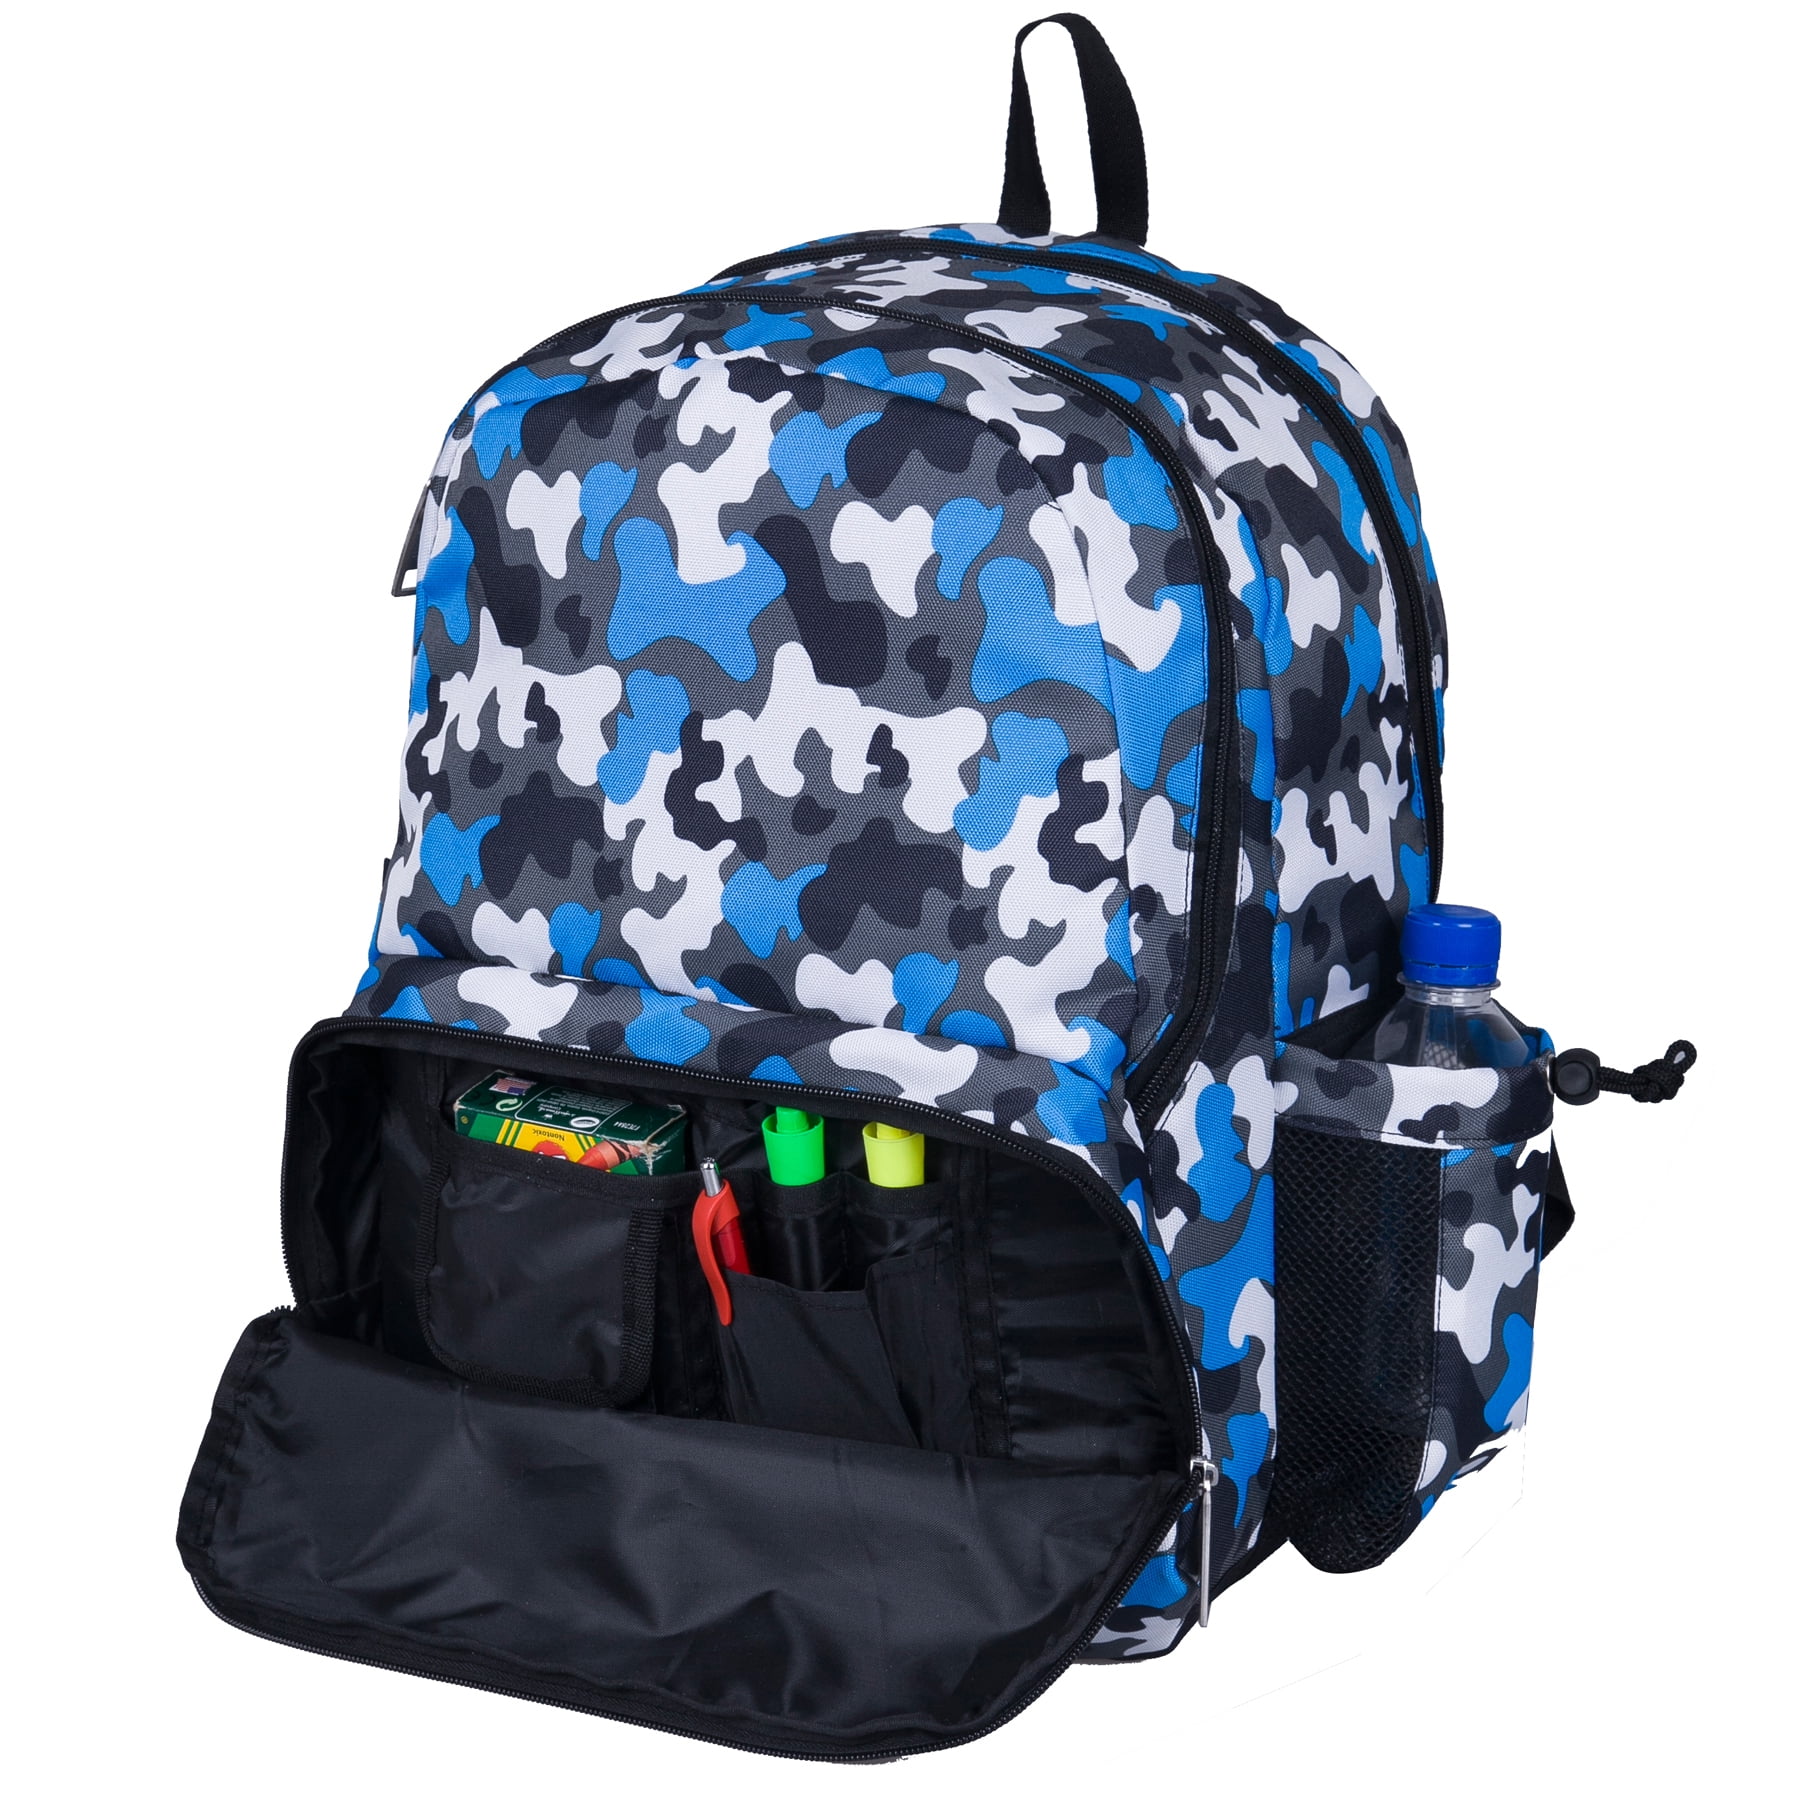  HAIXING Camo Shark Backpack Laptop Backpack For Boys Travel Bag  Casual Daypack Hiking Bag For Girls 17inch School Begin Gifts : Electronics